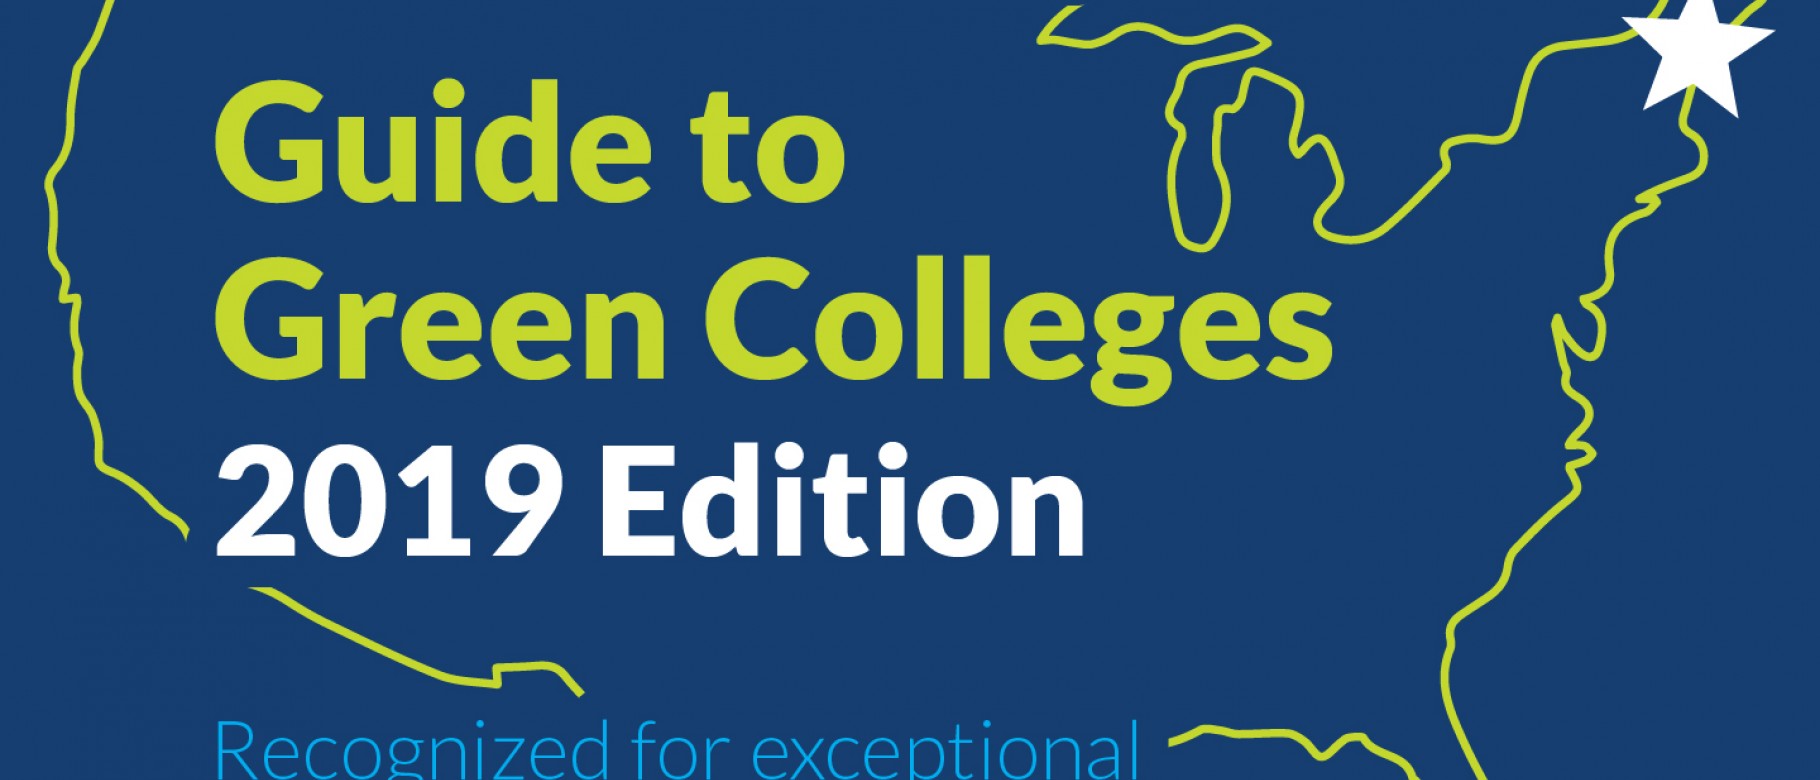 UNE featured in Princeton Review's 2019 Green College Guide